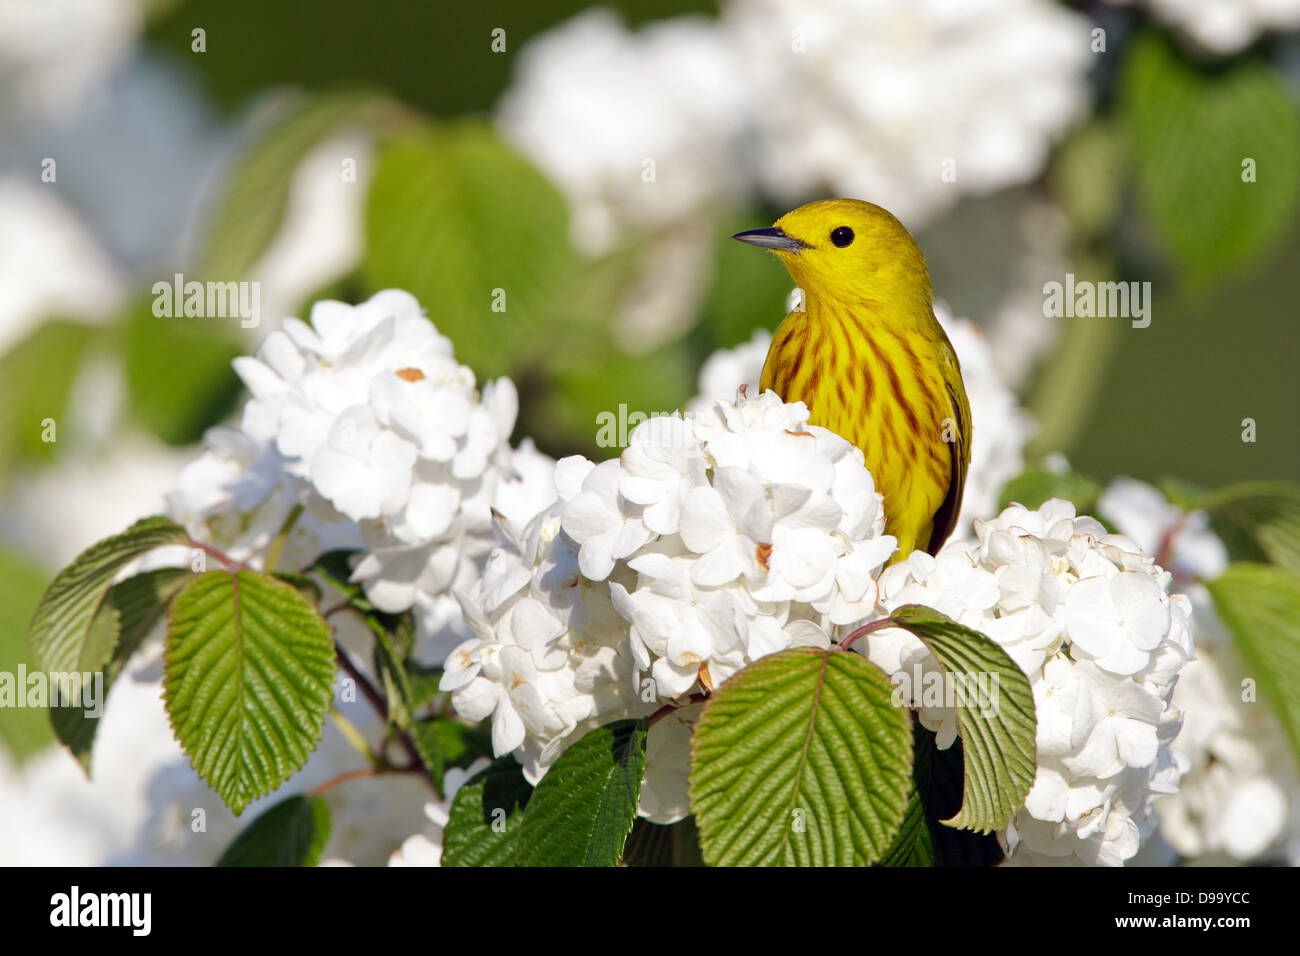 Yellow Warbler perching in Oakleaf Hydrangea Blossoms bird songbird Ornithology Science Nature Wildlife Environment Stock Photo